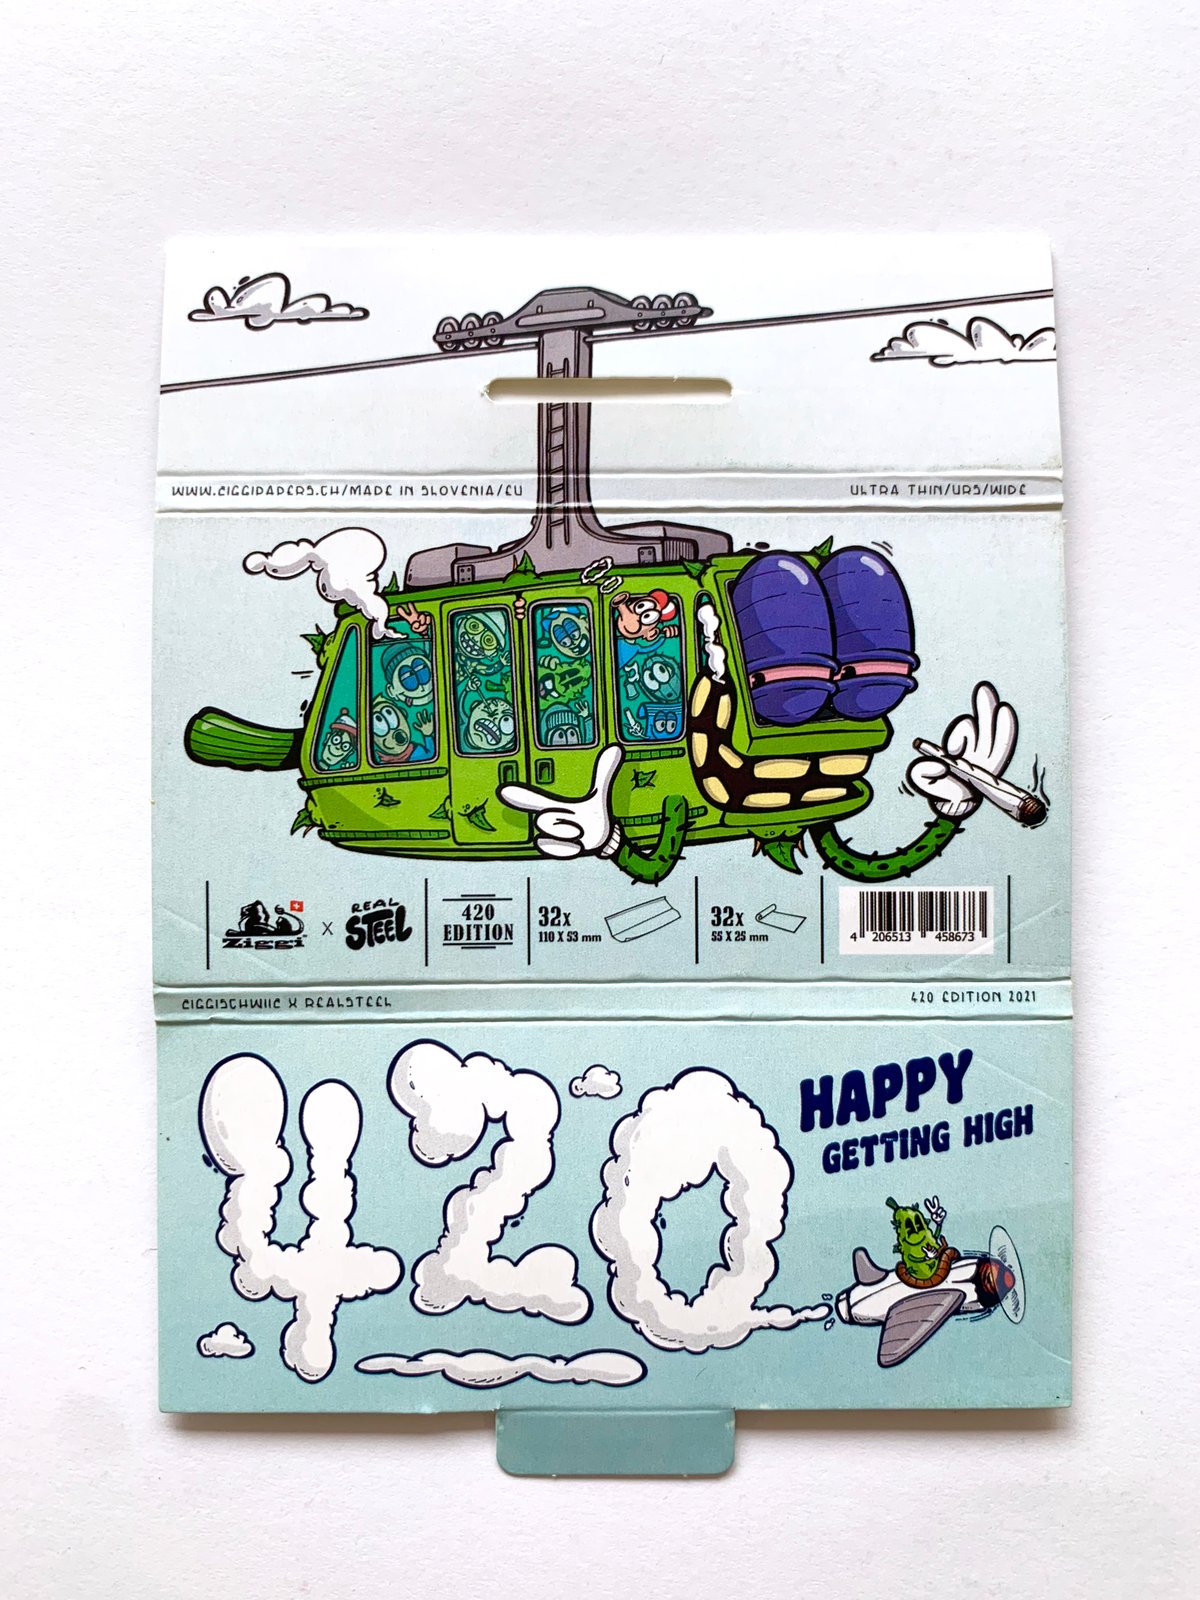 Image of ''Papers 420 Edition'' URS Wide